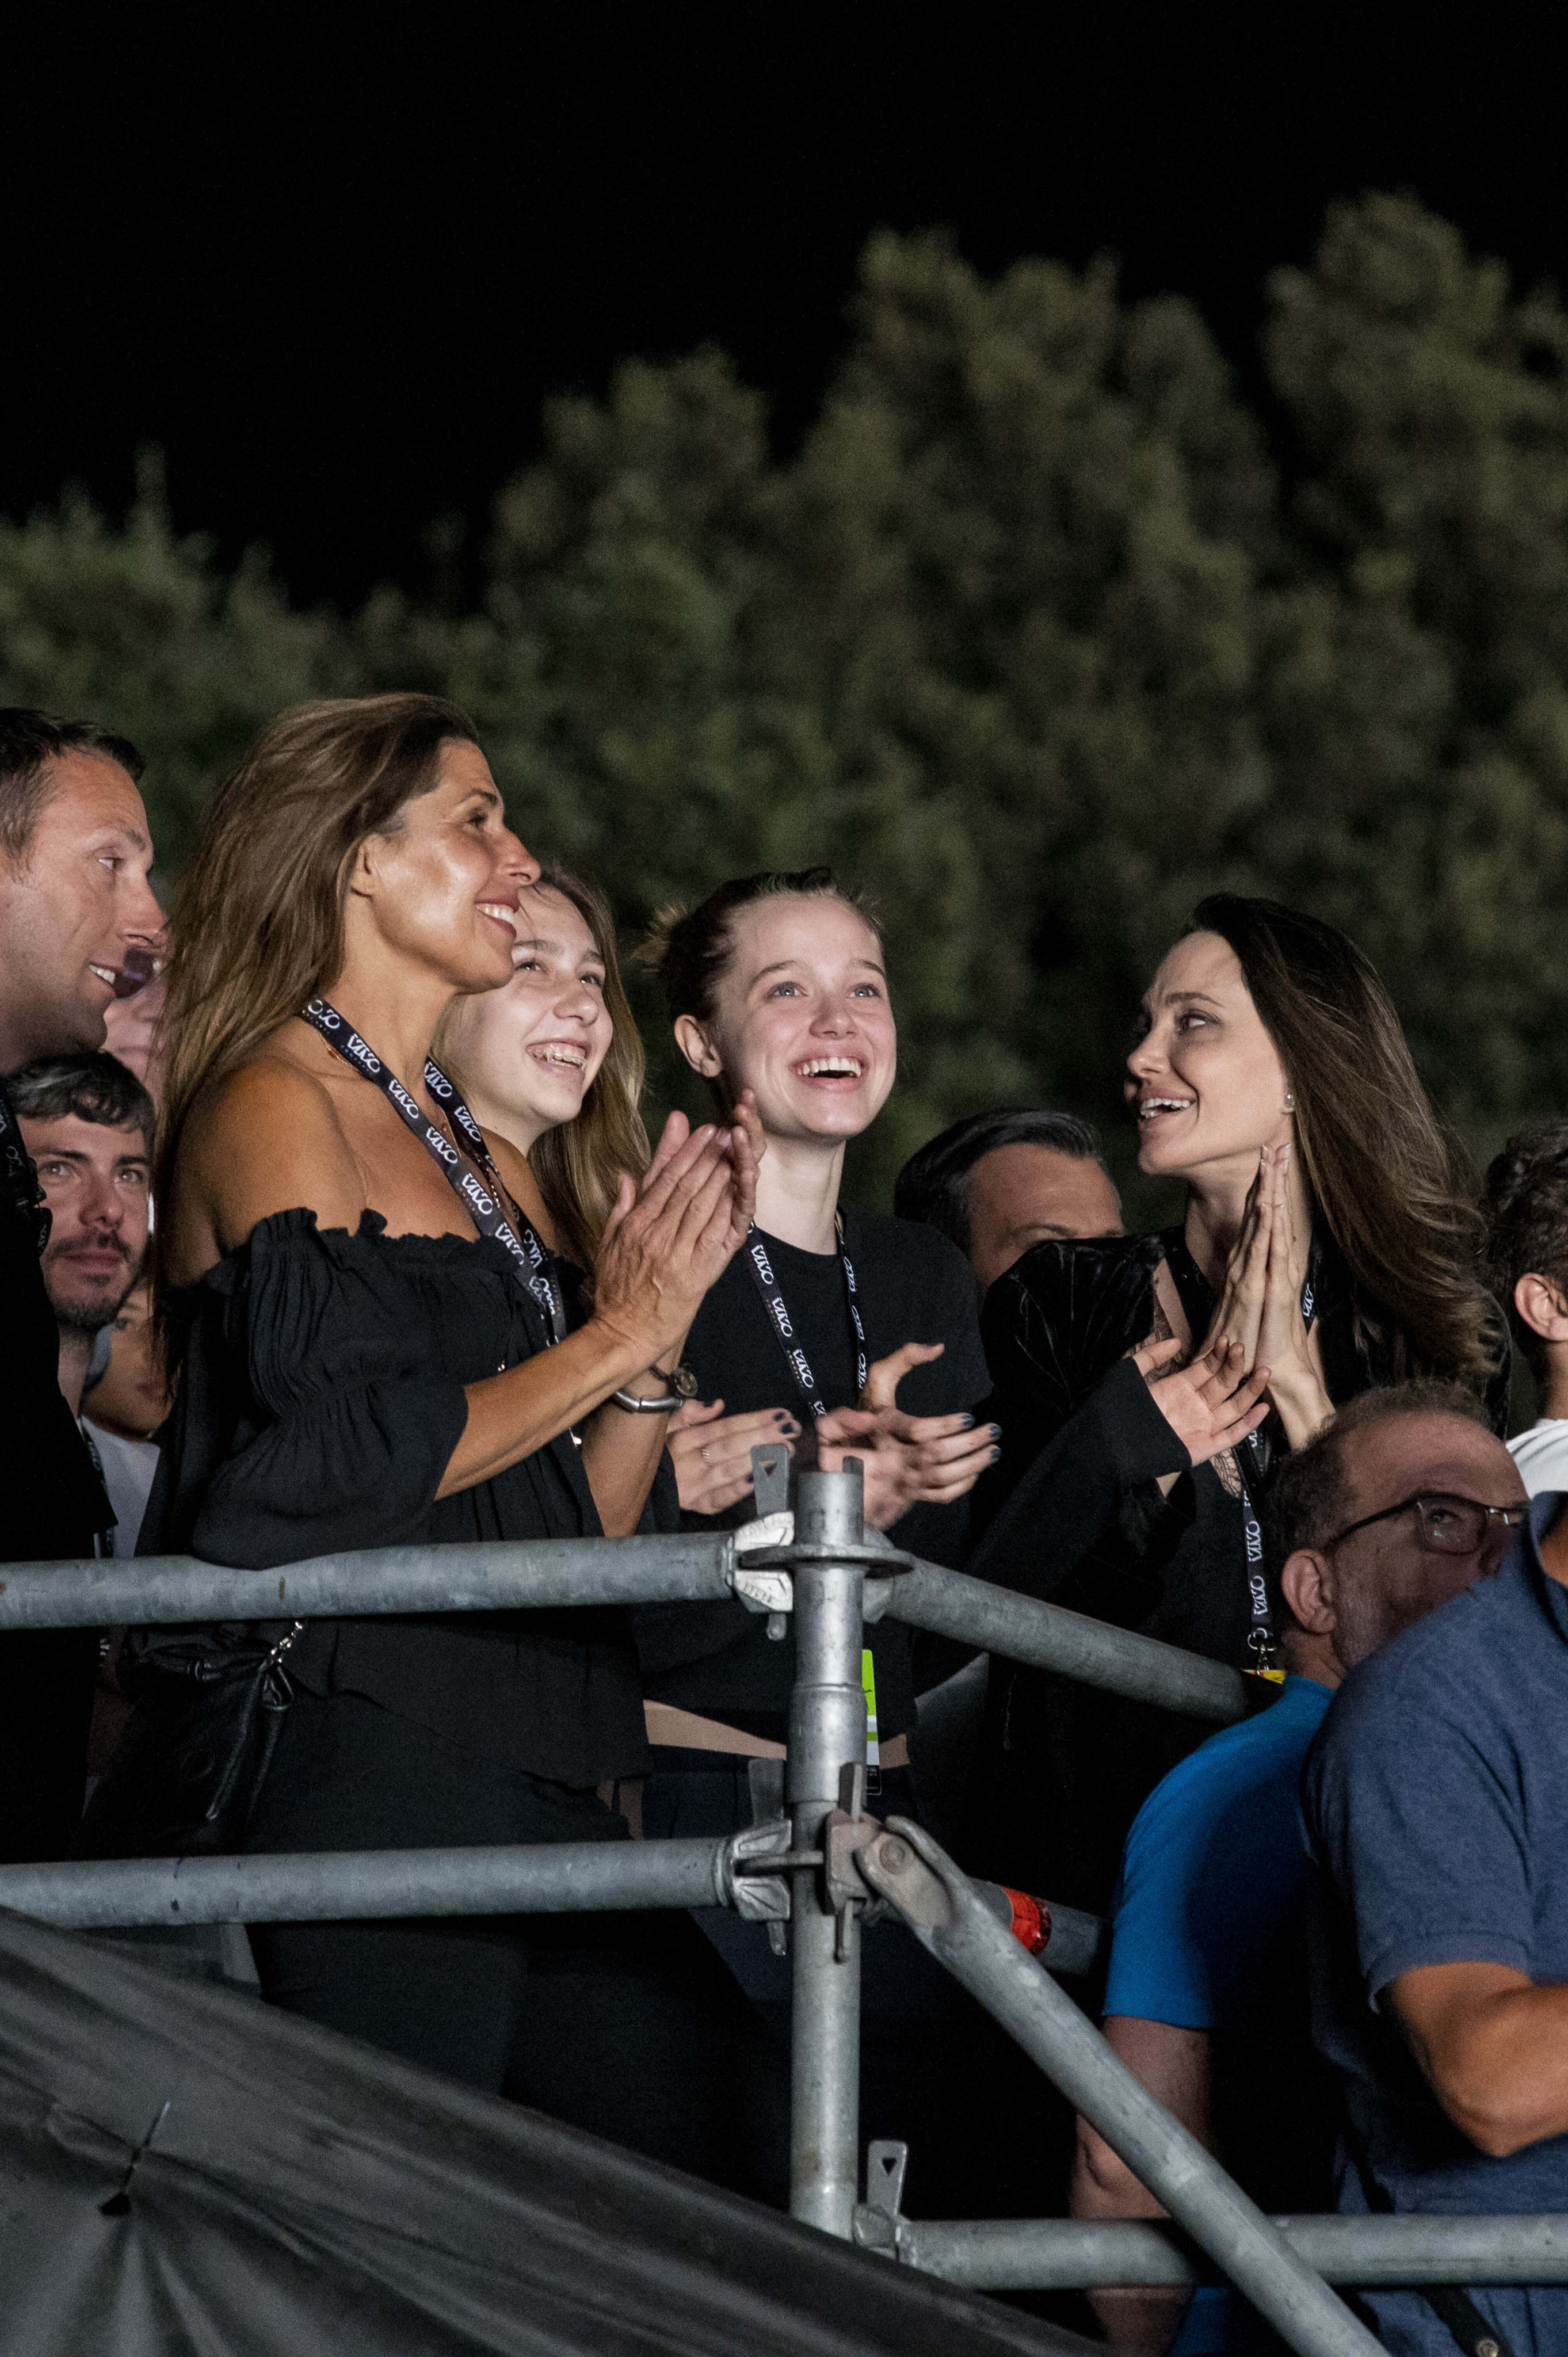 Like mother, like daughter: Angelina Jolie and daughter Shiloh Jolie-Pitt clap along to a rock concert in Italy. Photo: IPA